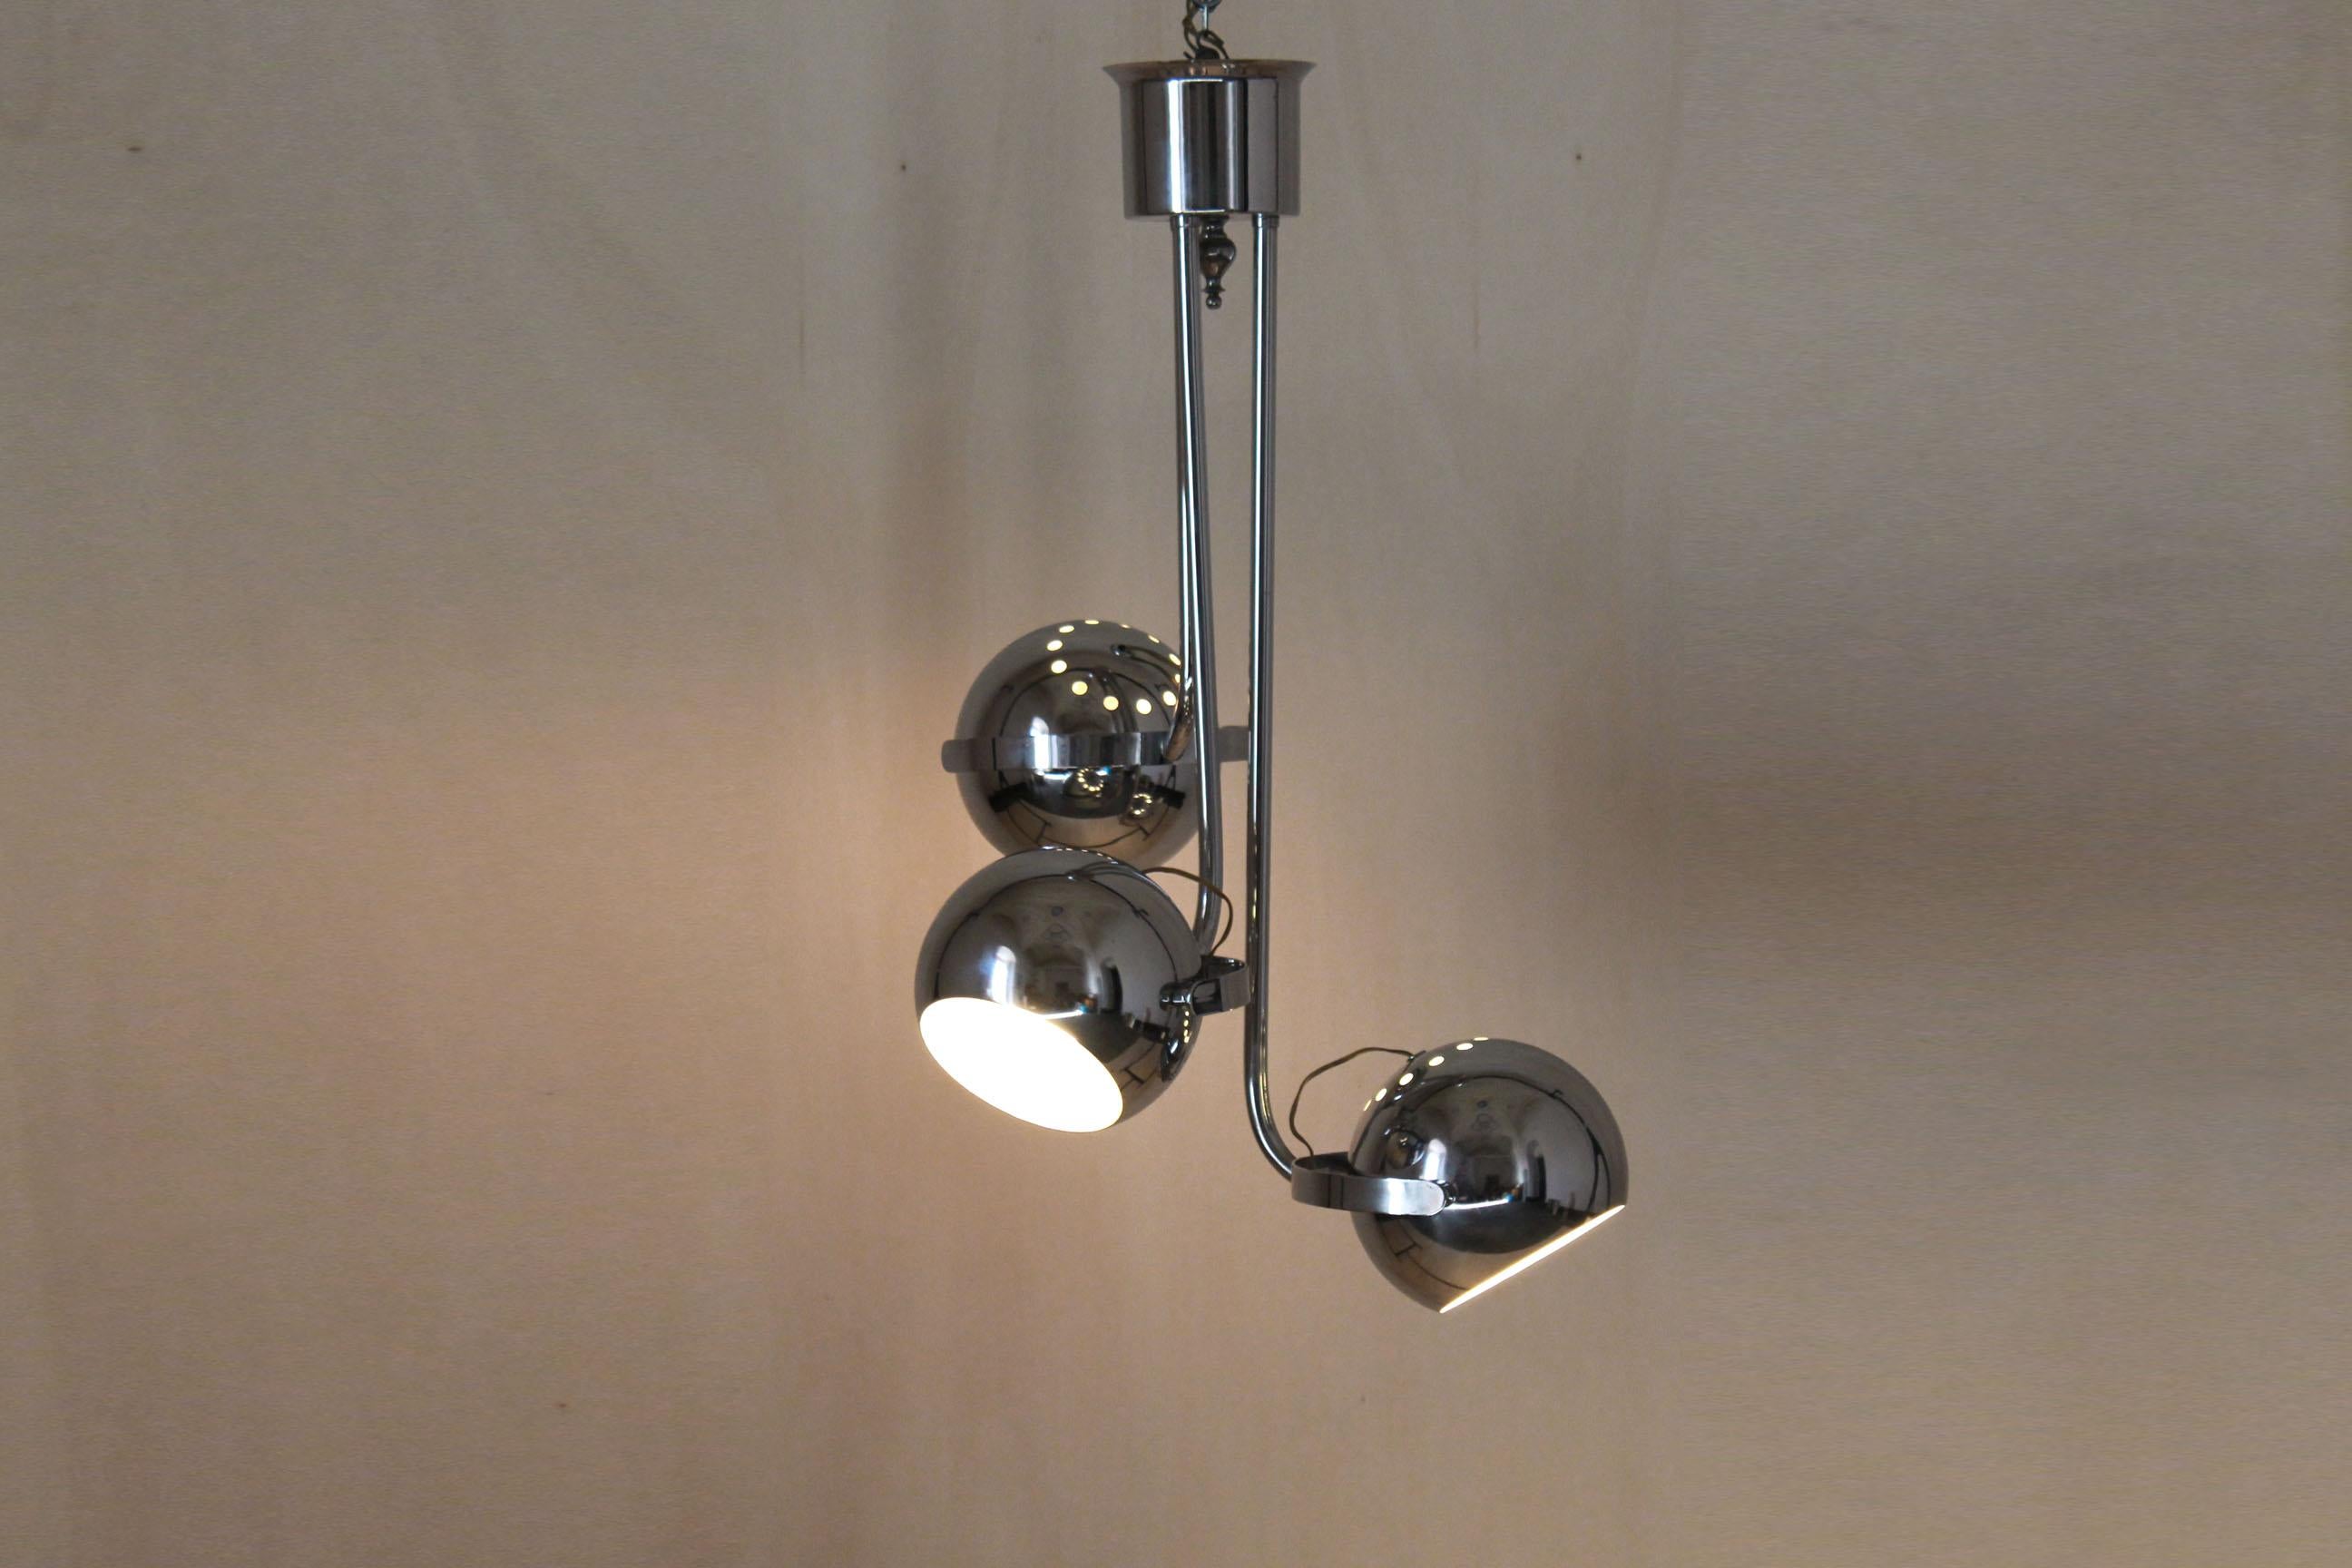 Space Age Chandelier with Three Flexible Light Spots, Reggiani Italy , 1970s.
A Reggiani vintage chromed chandelier composed by three lights spot. The item has been polished and electrical components revised by a professional. In excellent